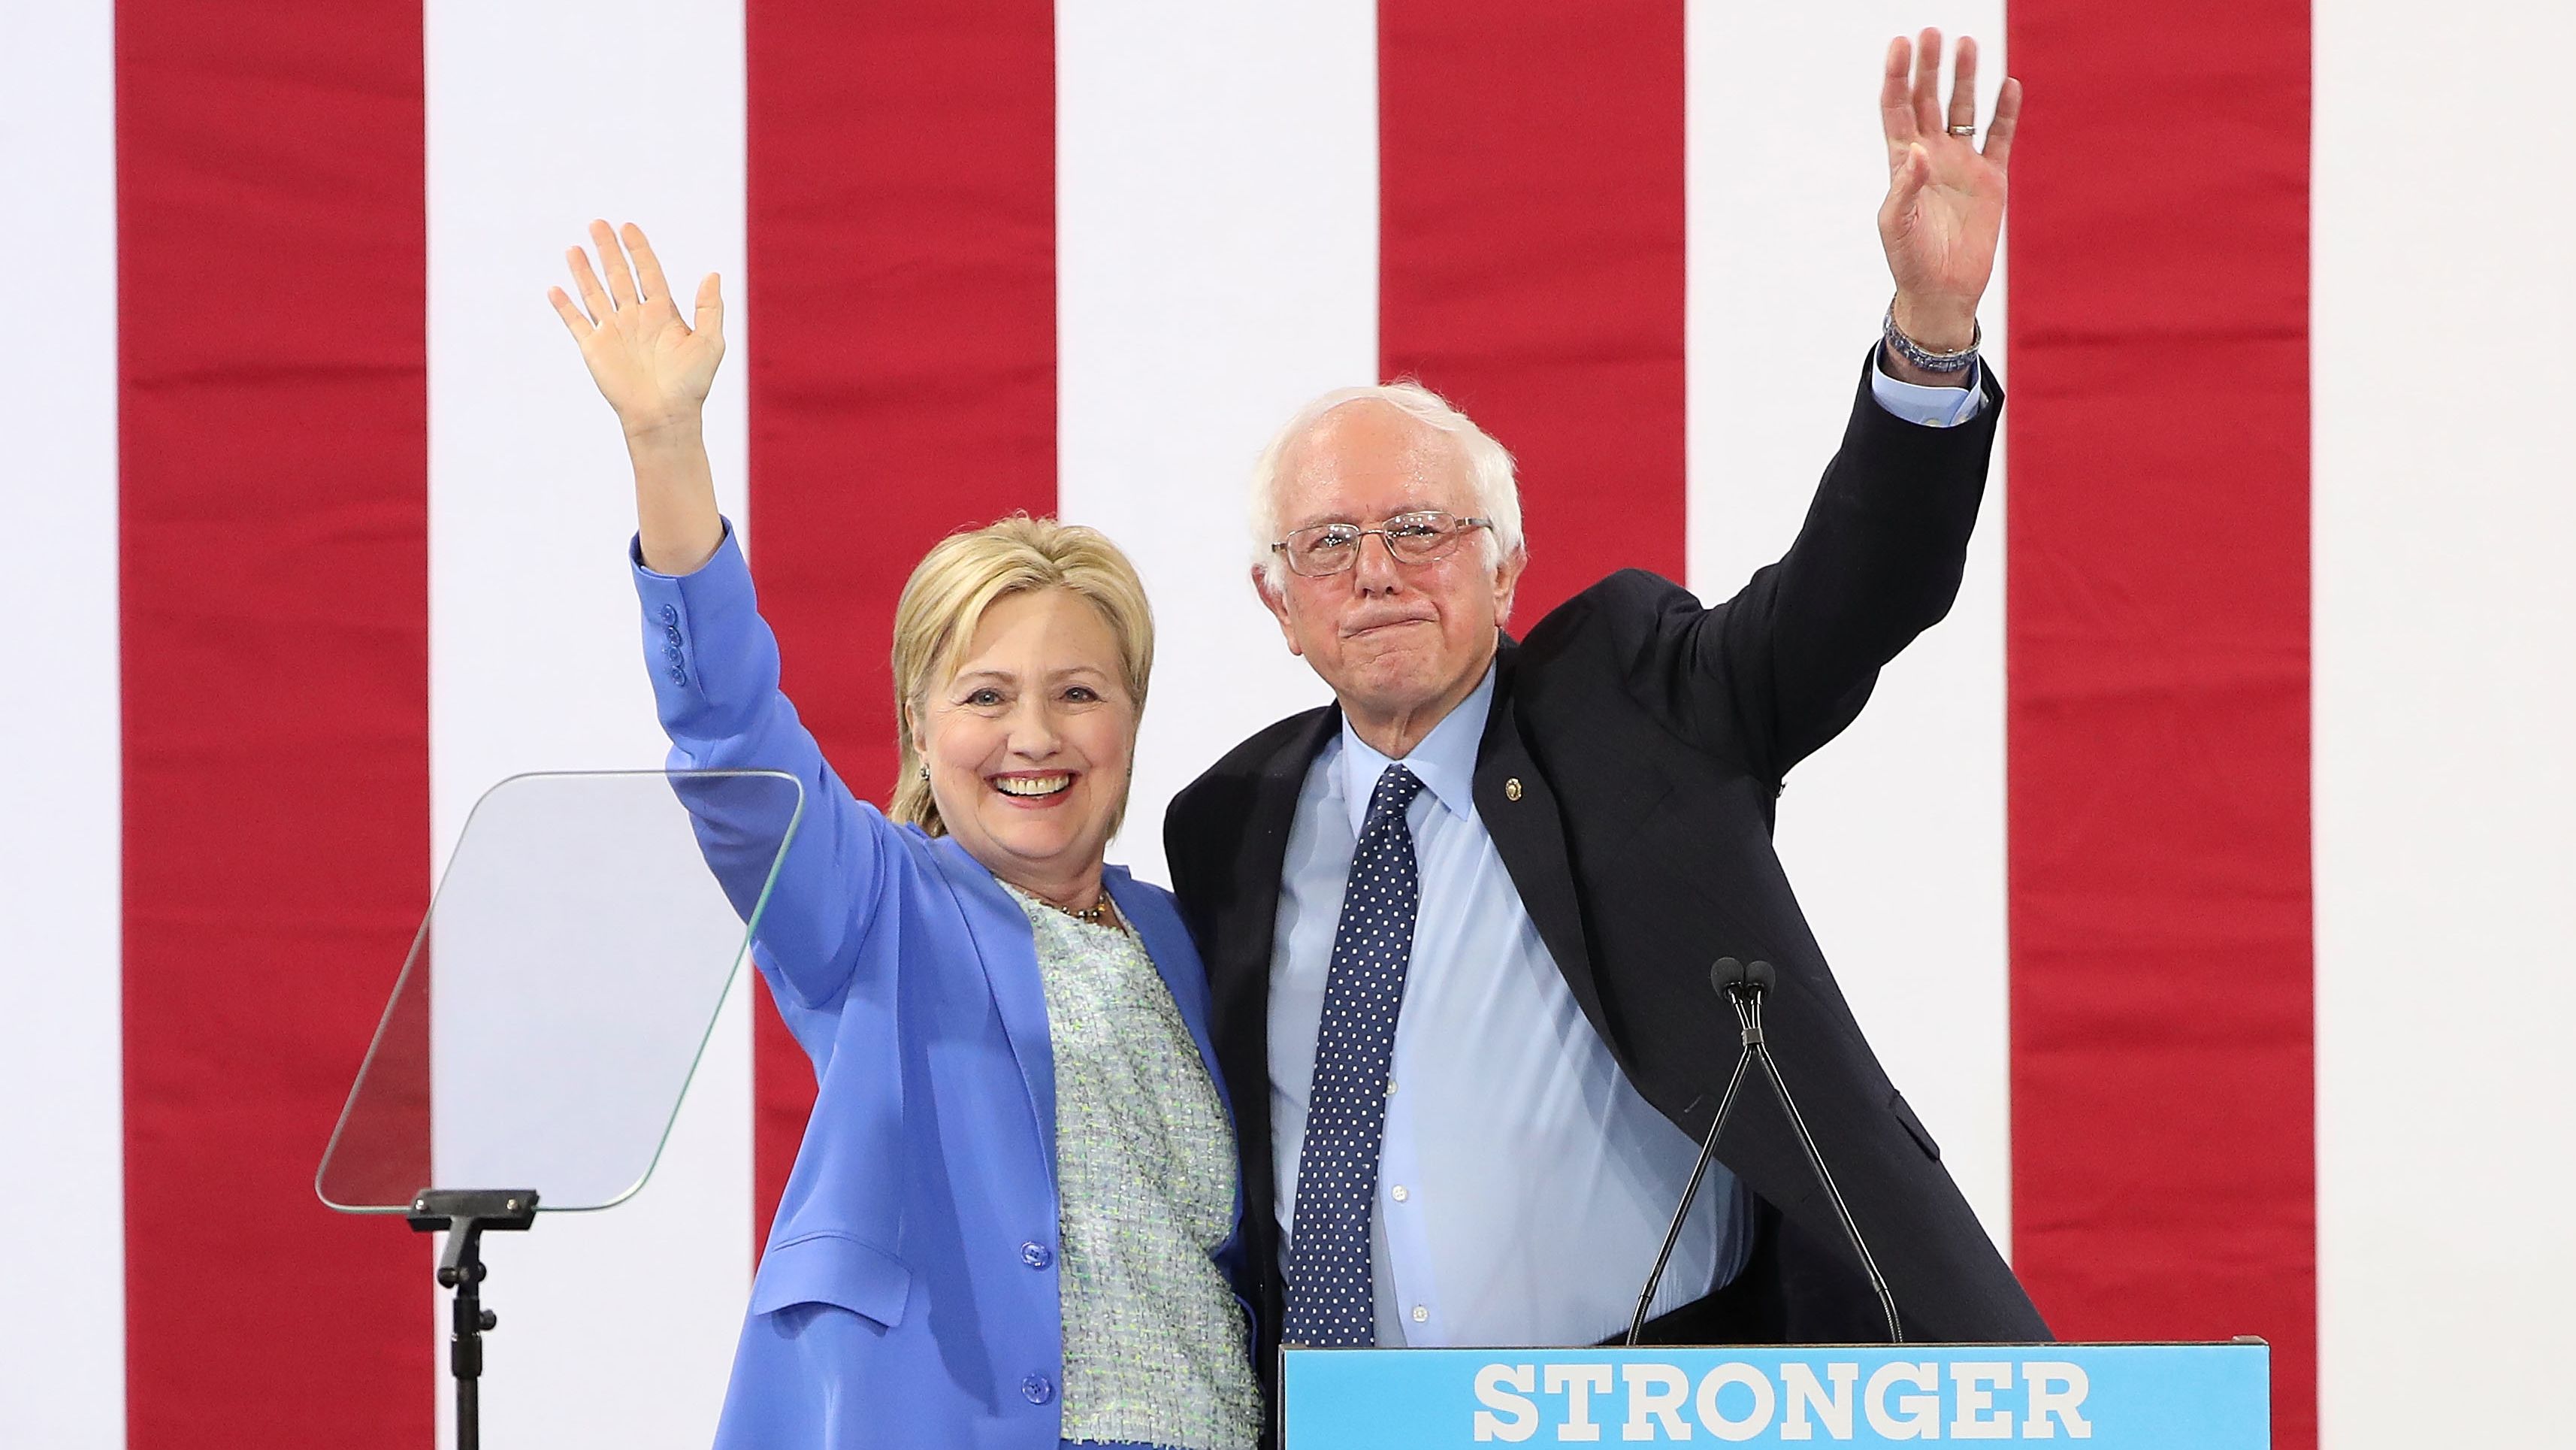 Sanders <a href="http://www.cnn.com/2016/07/11/politics/hillary-clinton-bernie-sanders/" target="_blank">endorses</a> Clinton at a rally in Portsmouth, New Hampshire, in July 2016.